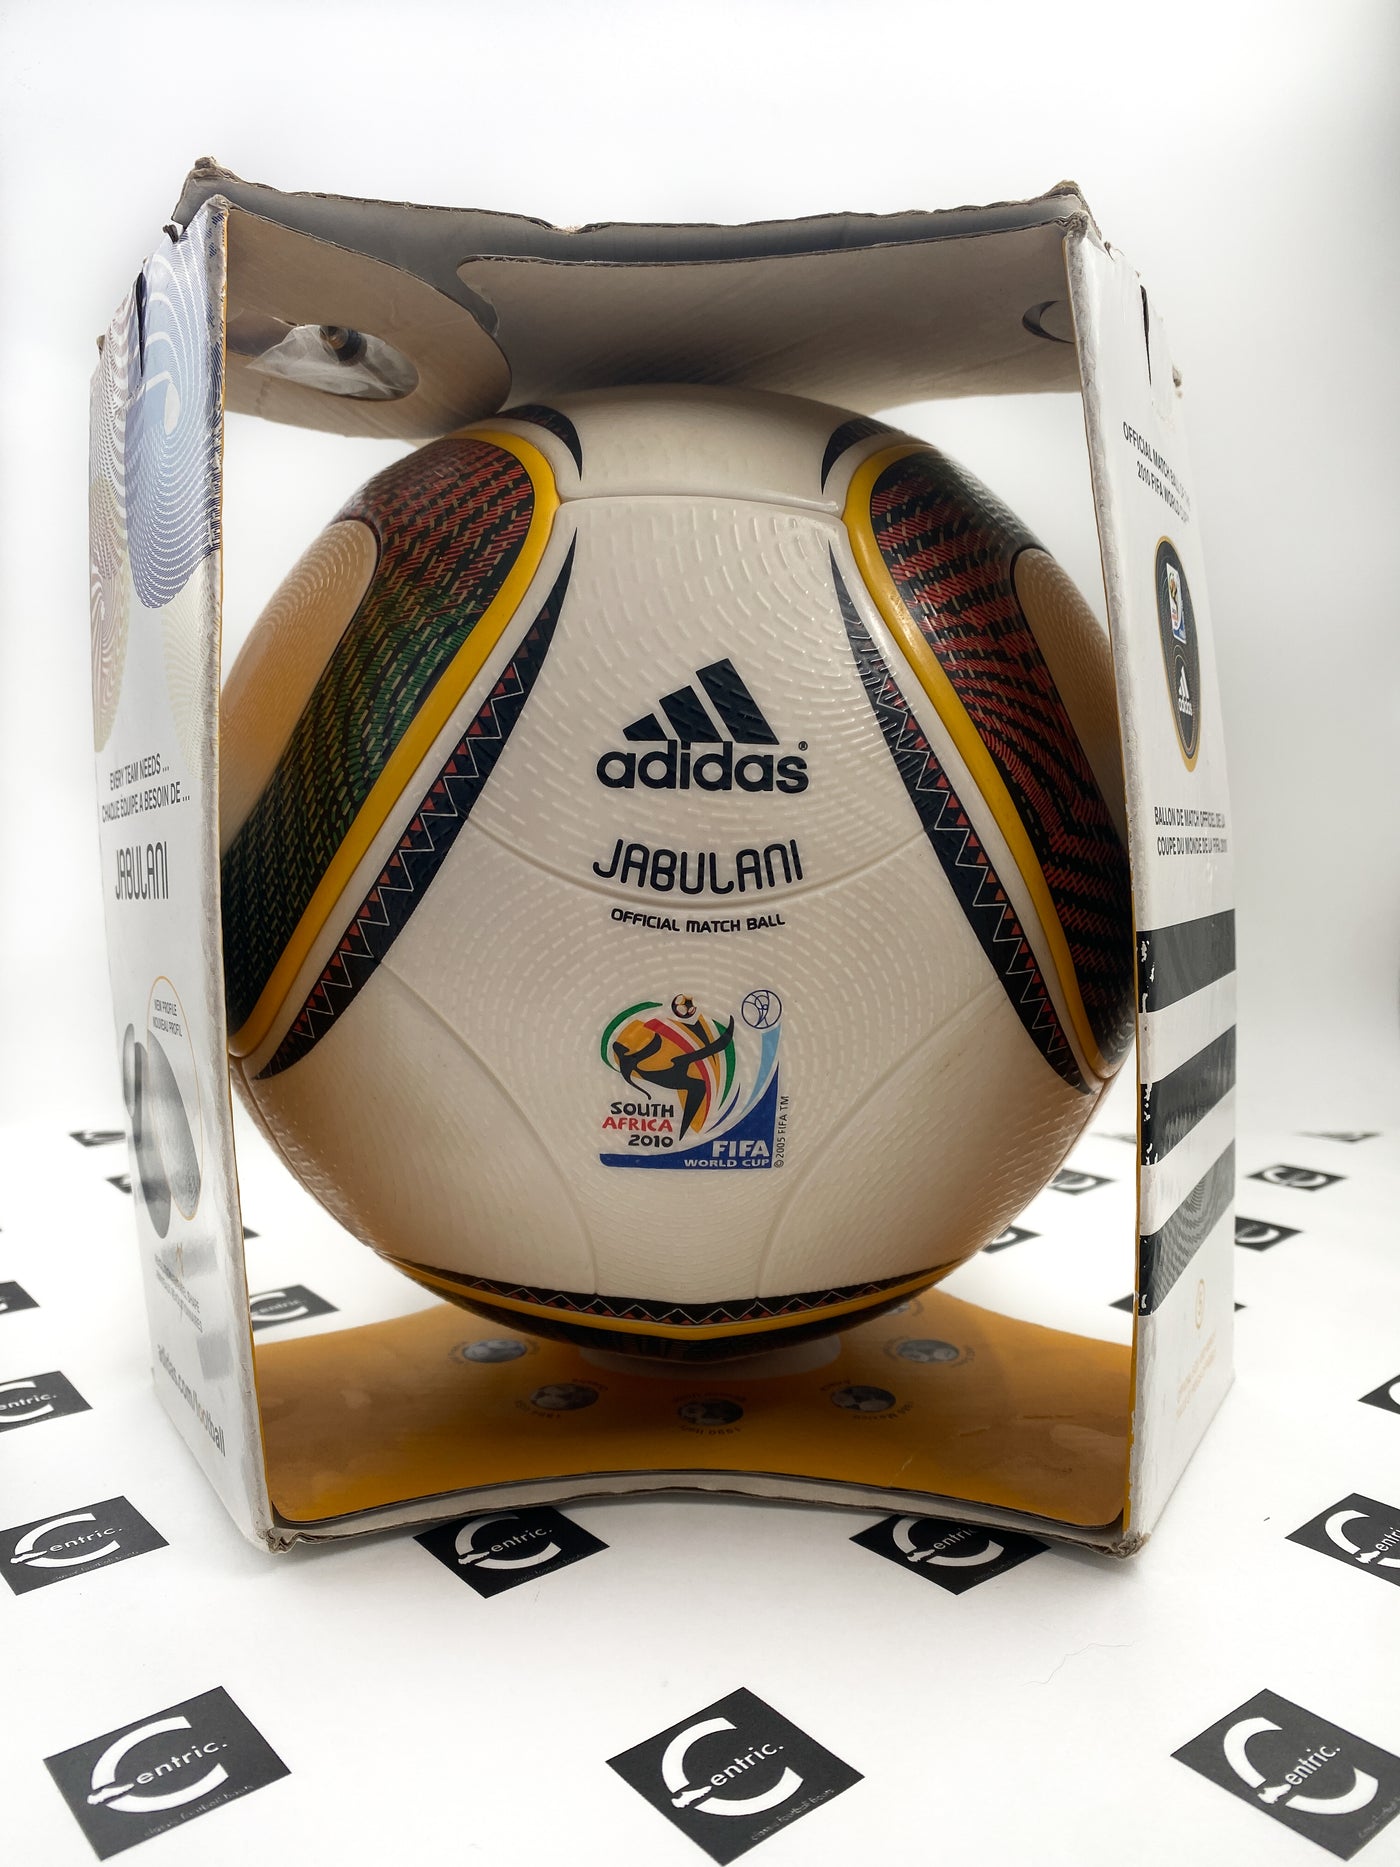 Sold at Auction: Adidas Jabulani World Cup 2010 official match